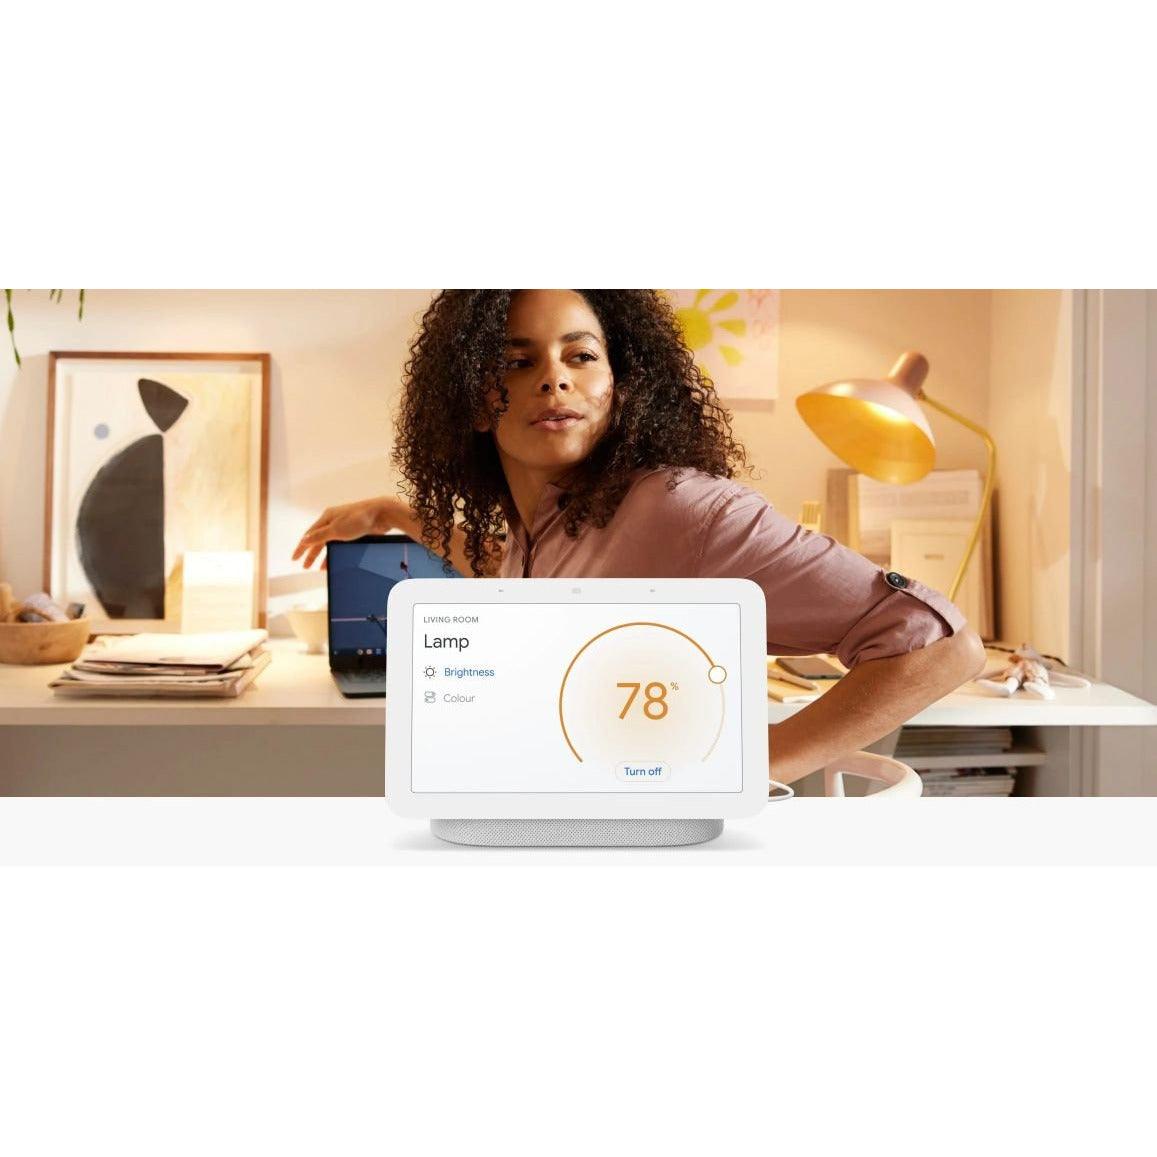 Google Nest Hub 2nd Gen with Google Assistant - Chalk | GA01331-GB from DID Electrical - guaranteed Irish, guaranteed quality service. (6977694564540)